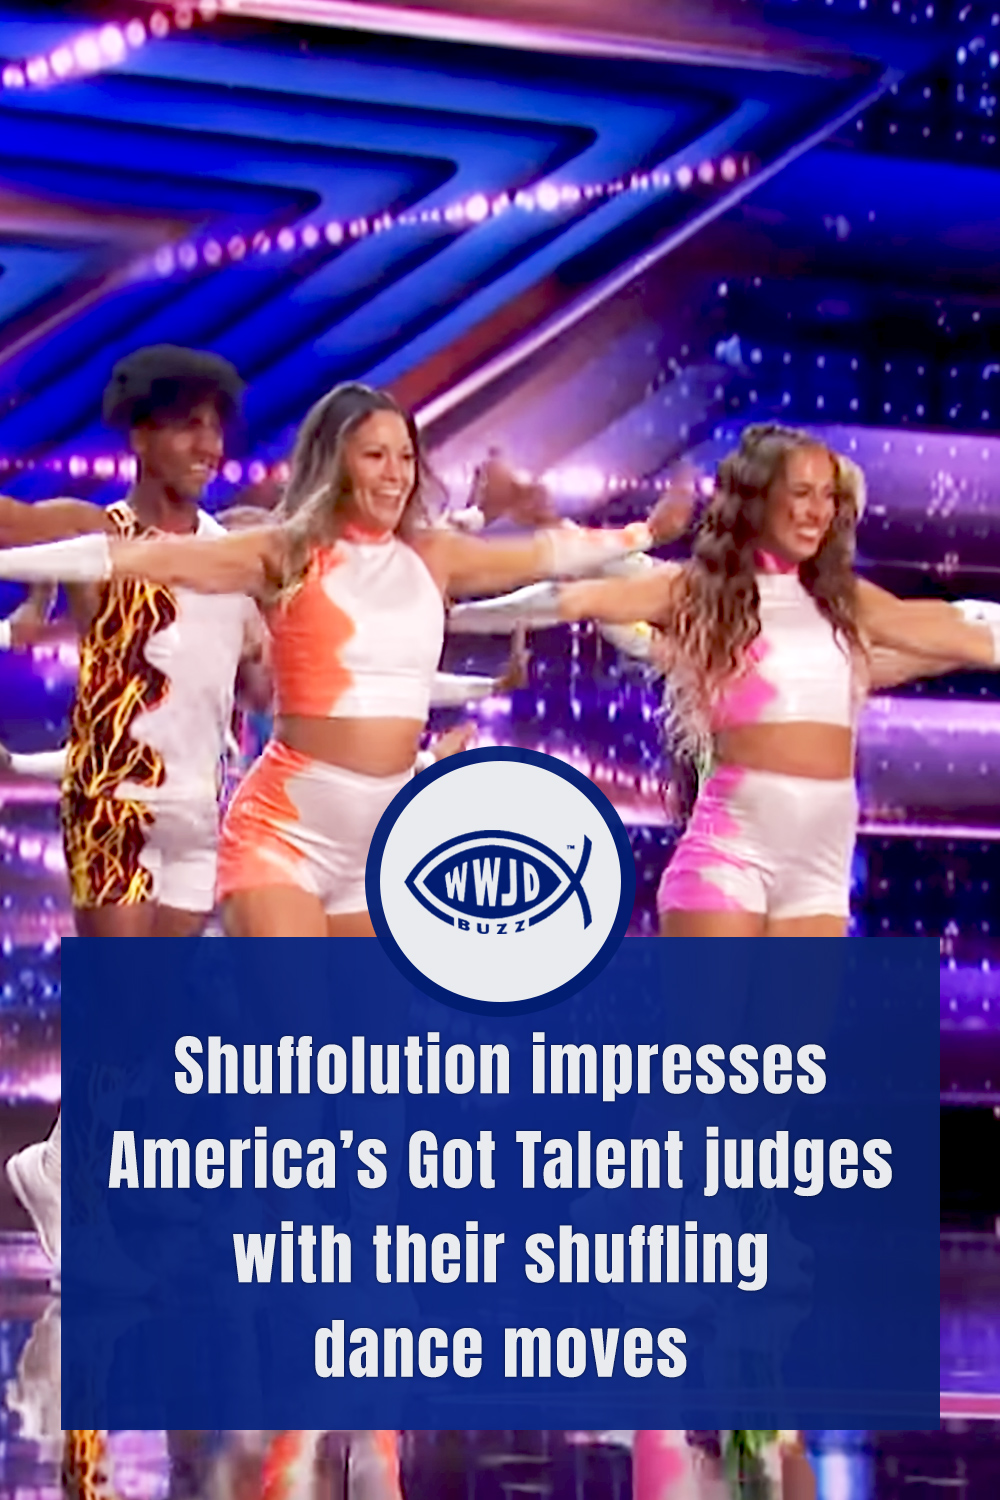 Shuffolution impresses America’s Got Talent judges with their shuffling dance moves